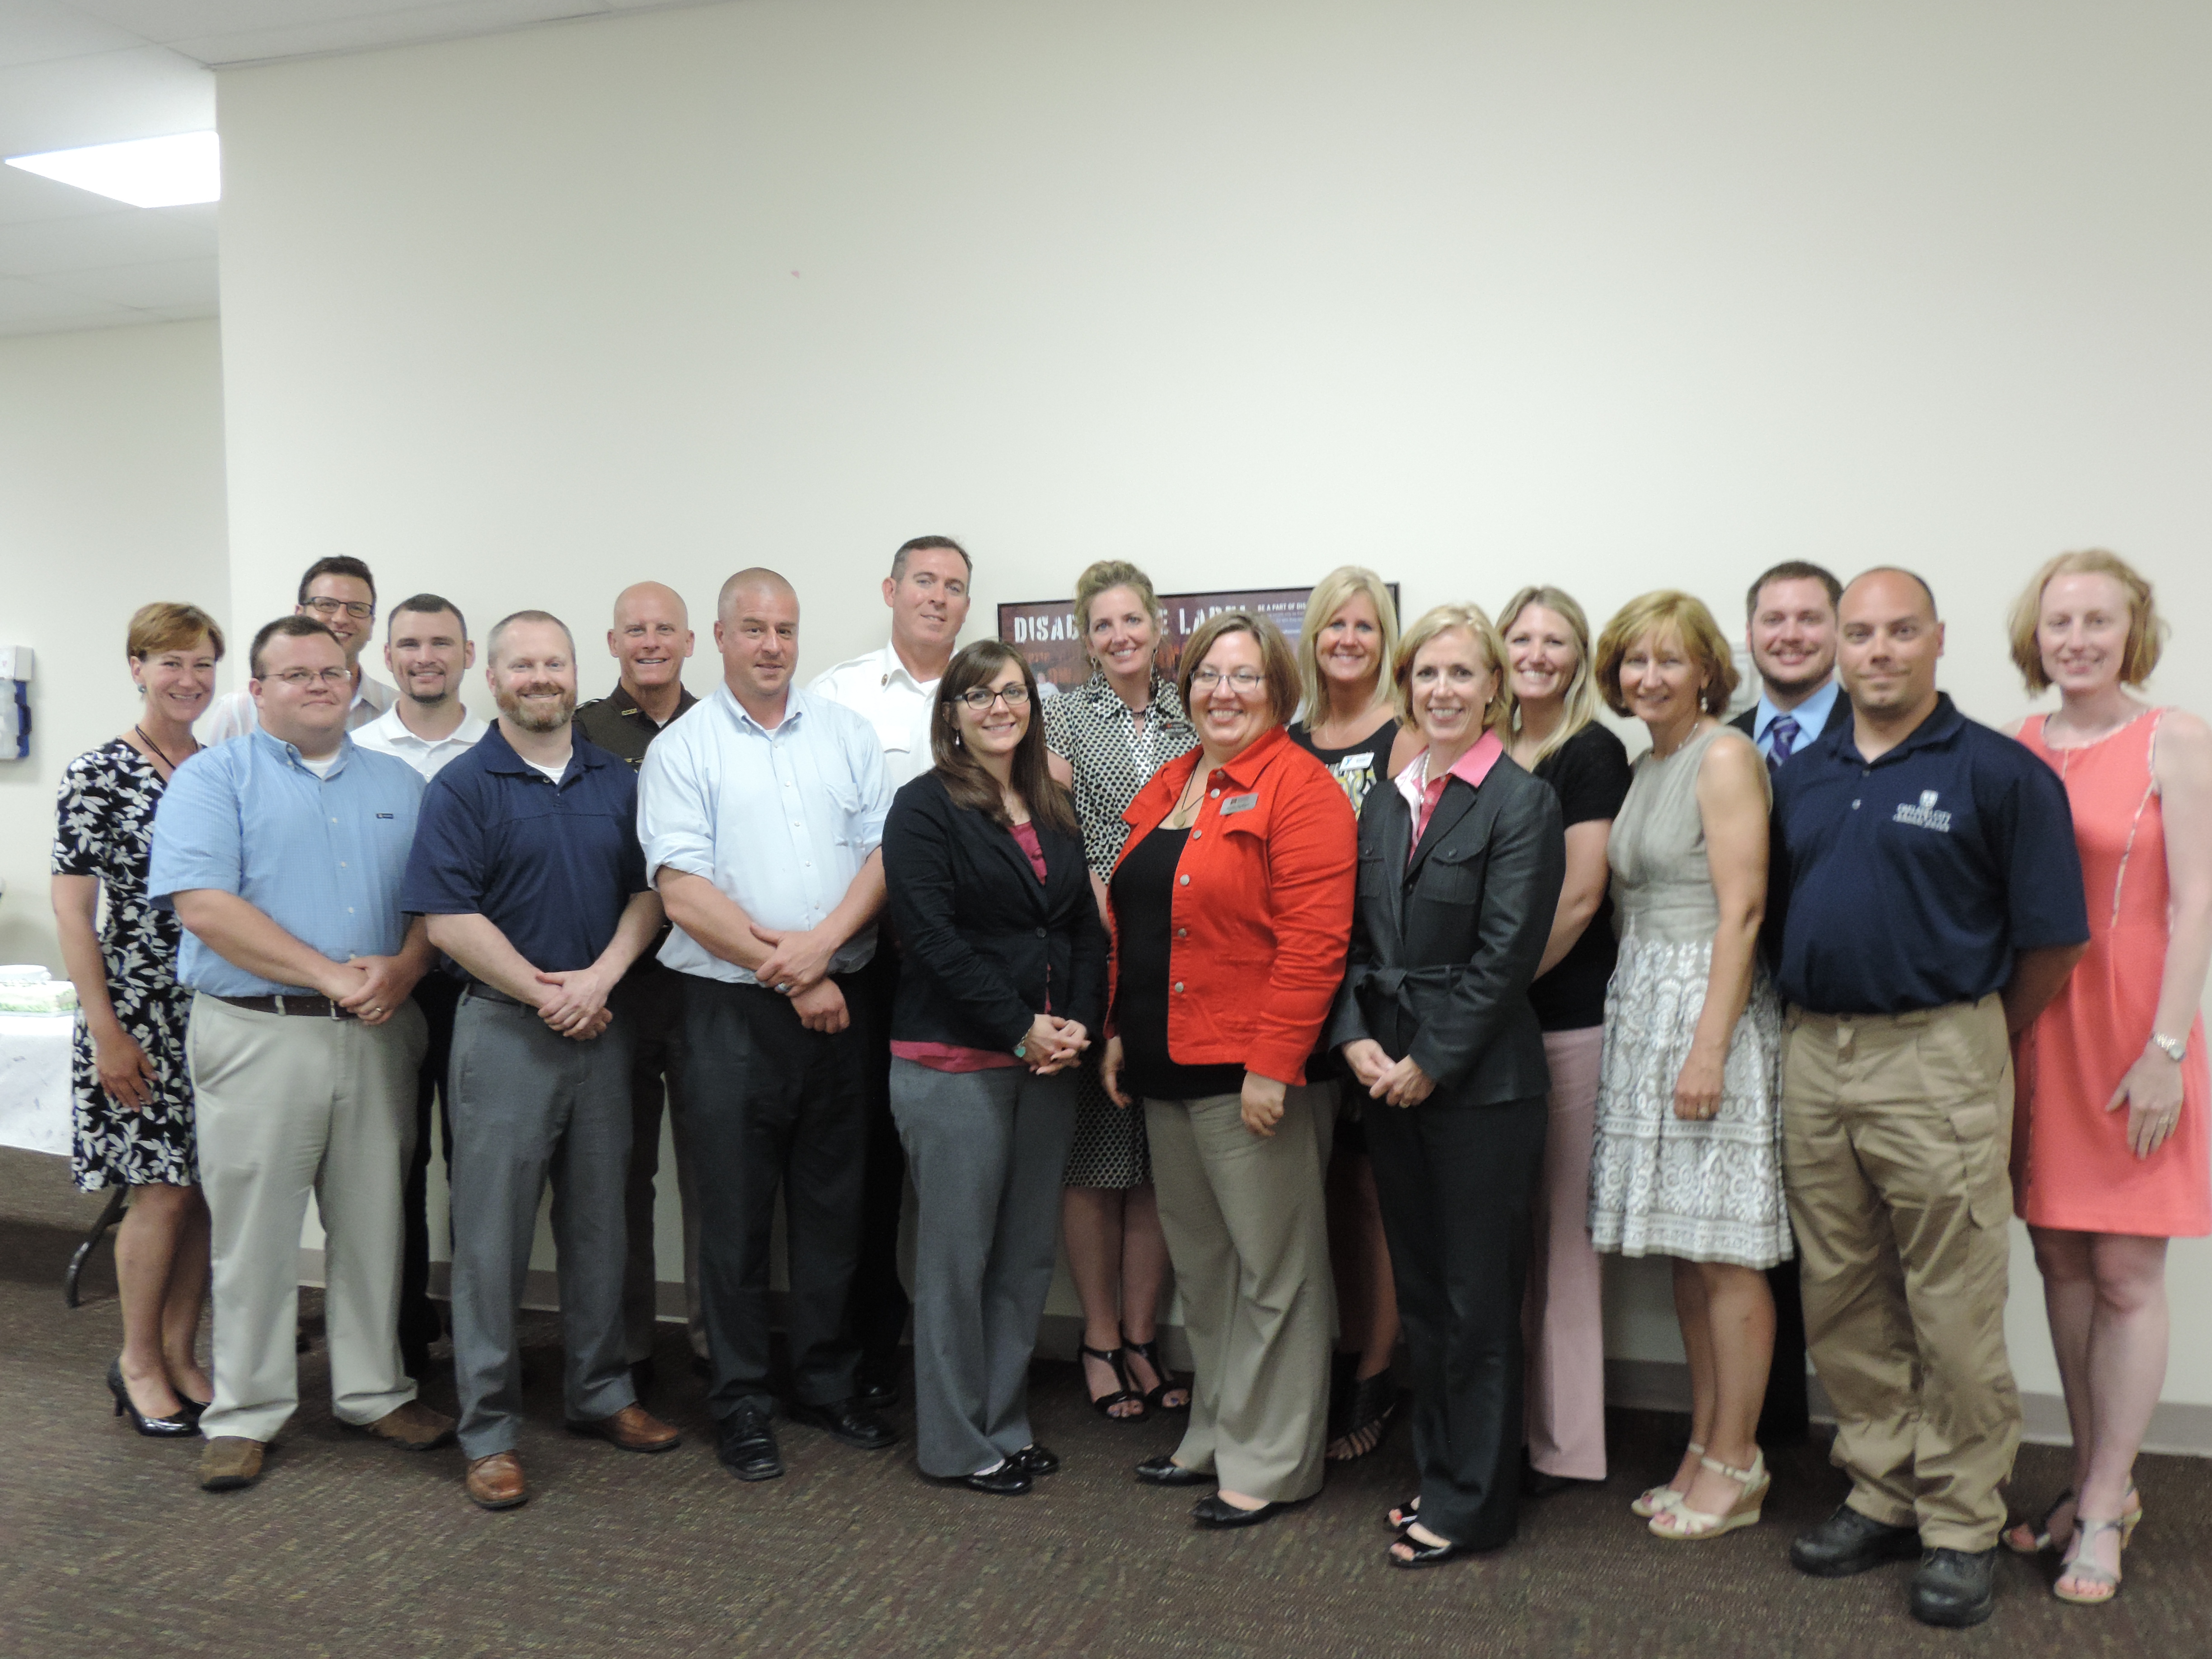 Members of the 2014 Boone County Leadership class: Pictured in front row (L to R):  Andrew Johnson, Matt Reynolds, Steve Carr, Katie Aeschliman, Jen Pendleton, Lynn Kissel, Jane Perkins and Ben Phelps Pictured in back row (L to R):  Kirsten Wujek, Joe LePage, Drew Cripe, Kevin Orr, Mike Baird, Jennifer Blandford, Shannon Russell, Natalie Kruger, Alex Kruse, Lora Stacy Fippen, Coordinator, Boone County Leadership. Not Pictured:  Angie Veatch